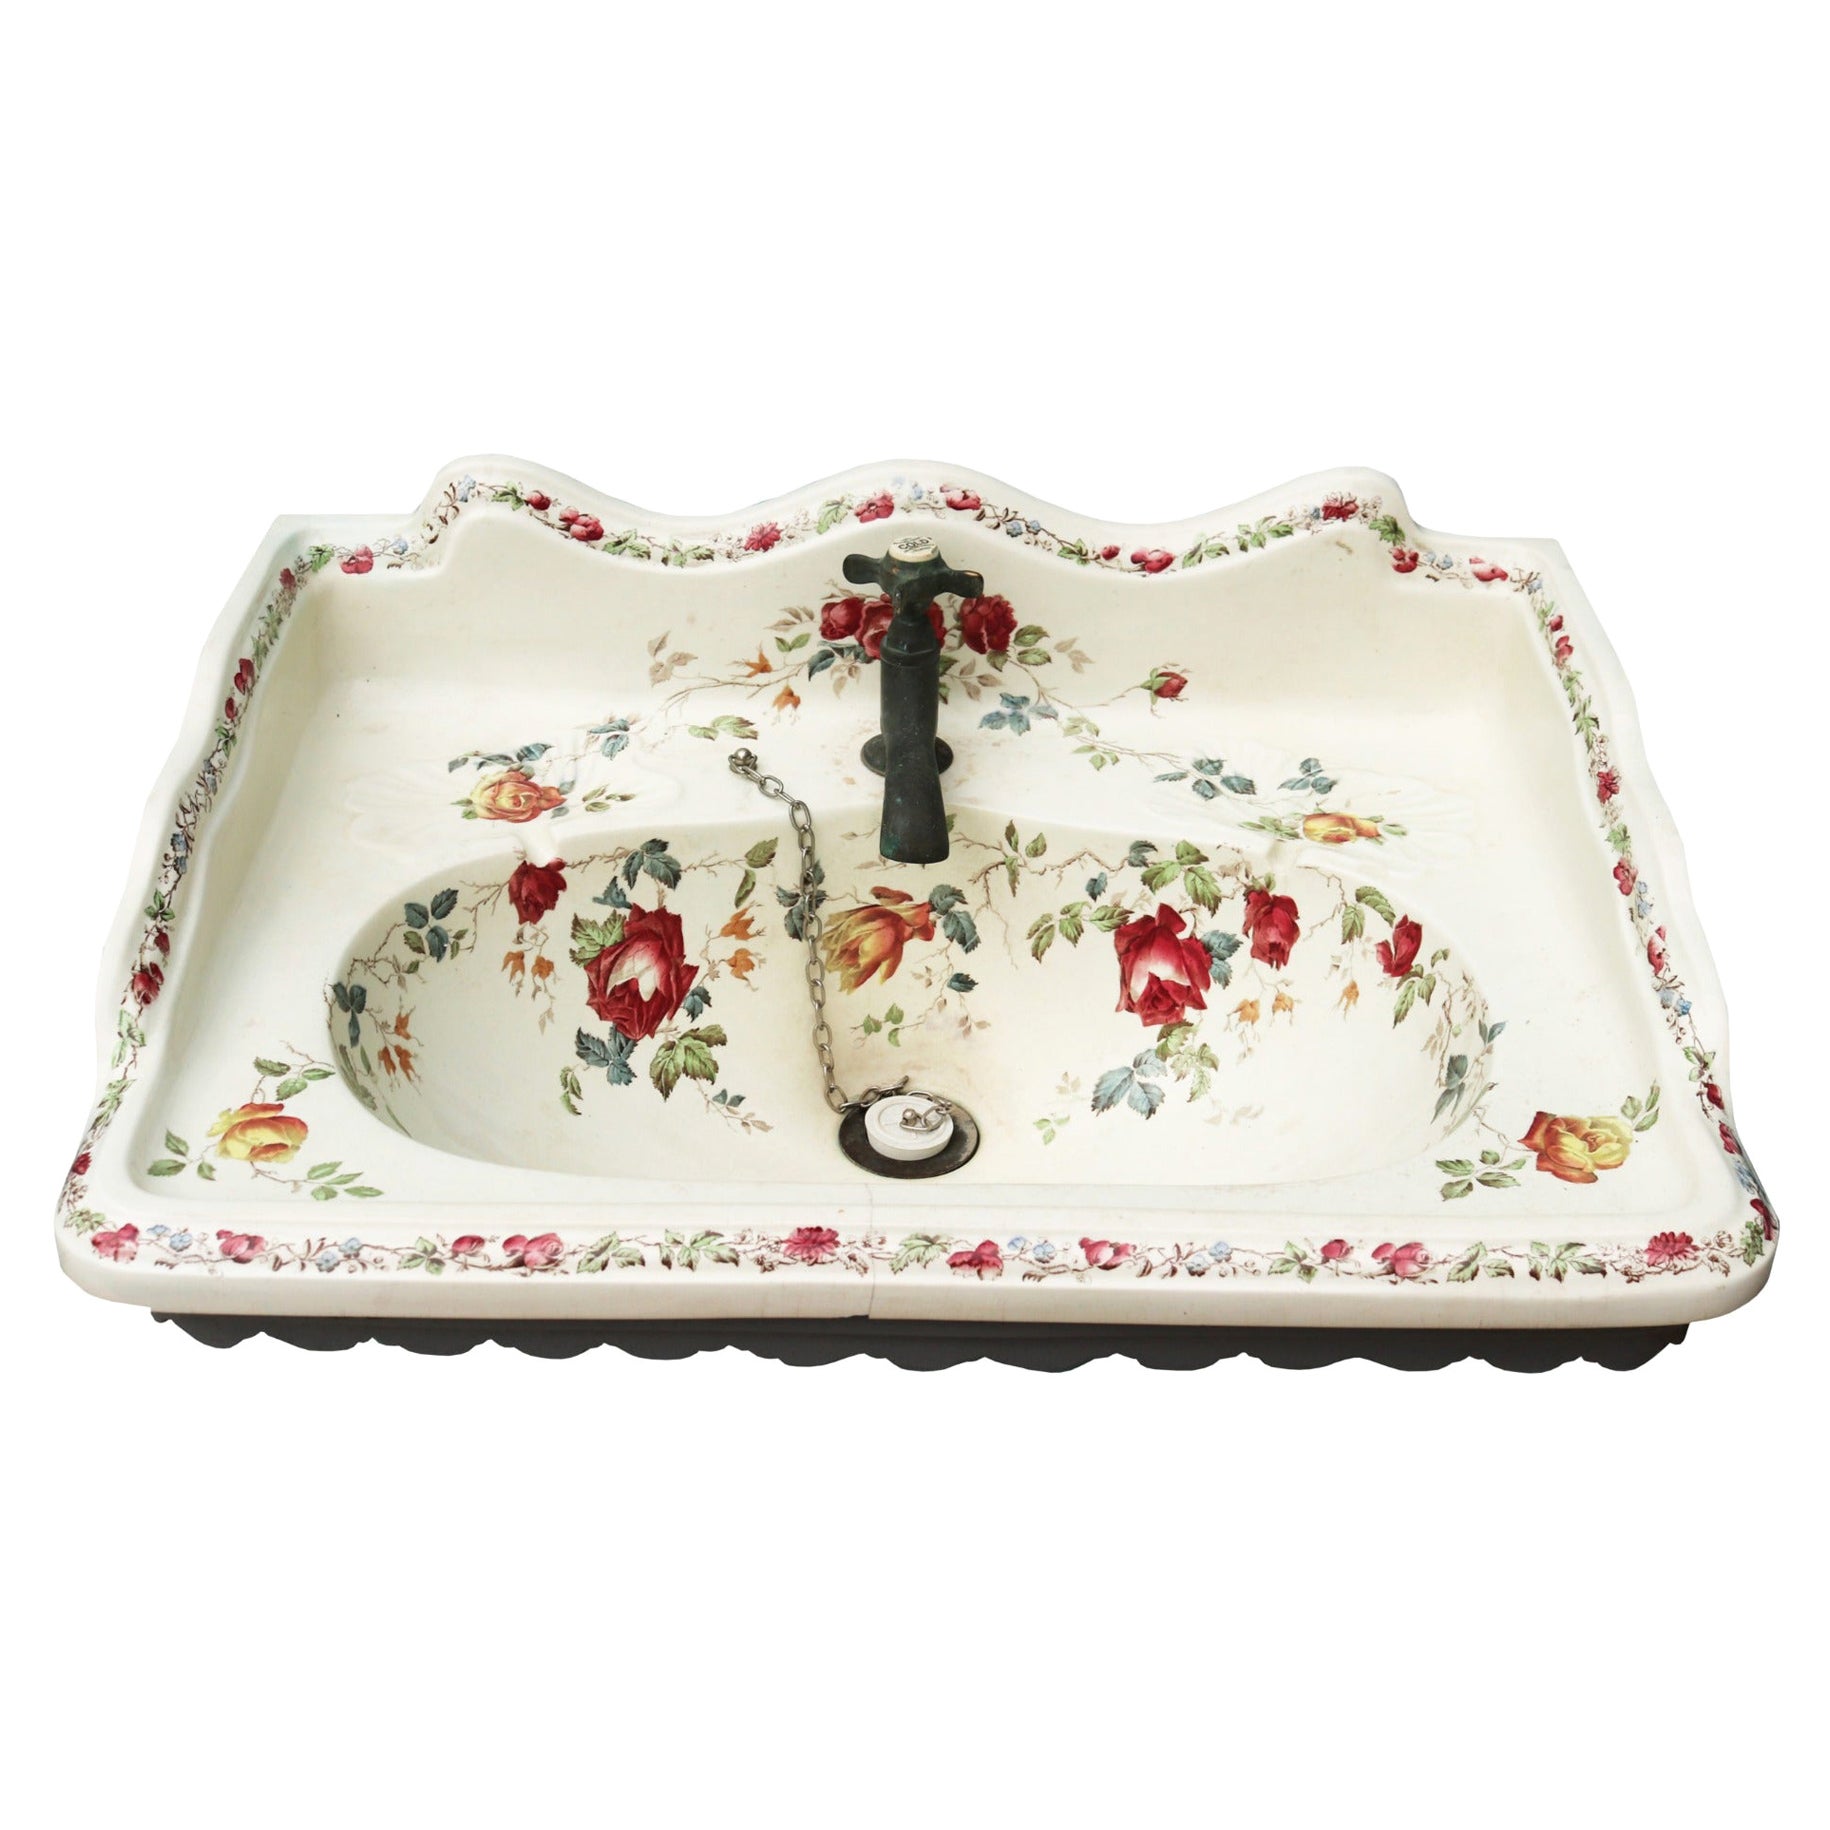 Antique English Transfer Printed Wash Basin For Sale